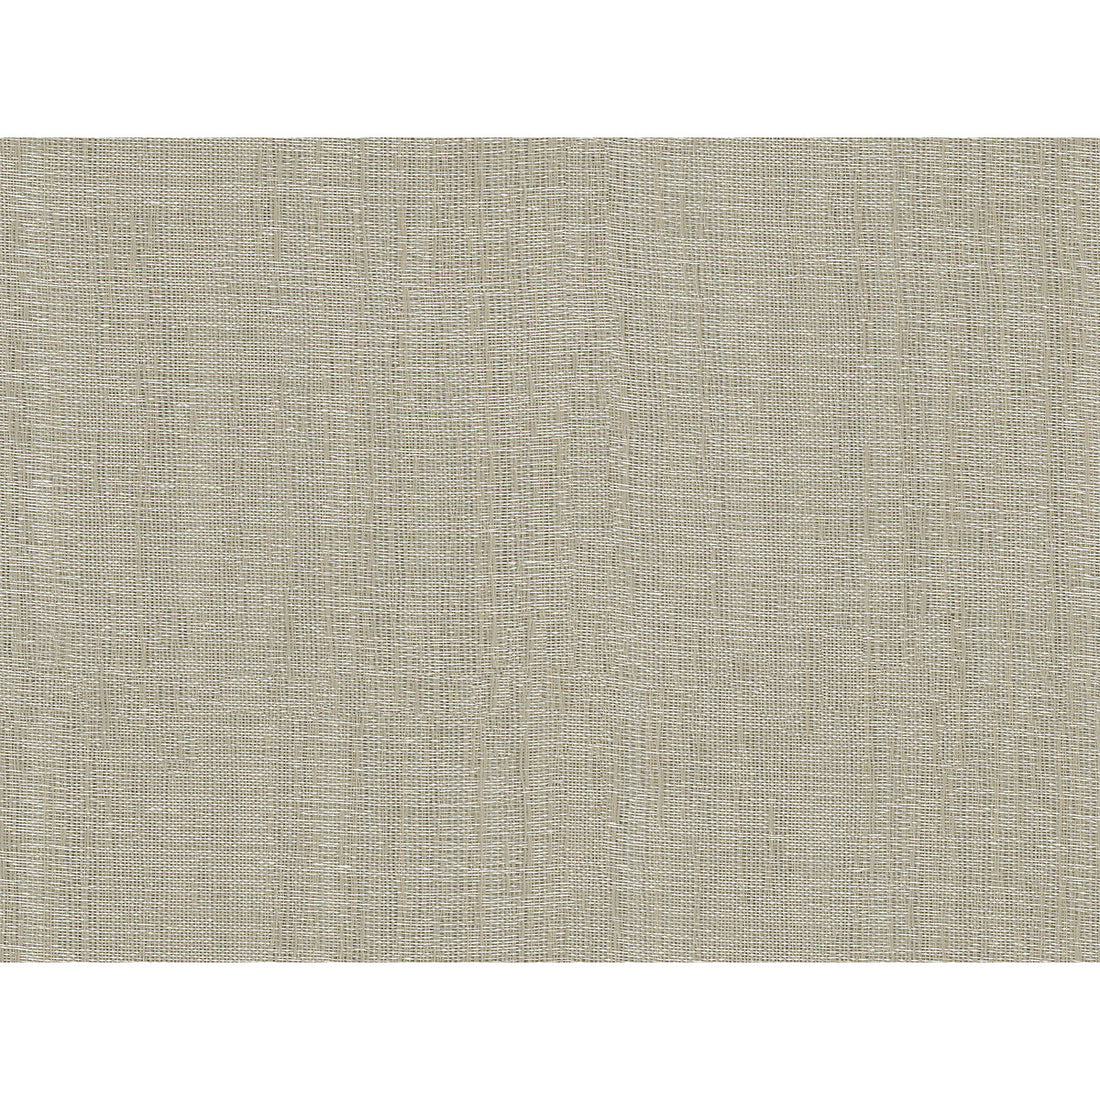 Kravet Contract fabric in 4537-16 color - pattern 4537.16.0 - by Kravet Contract